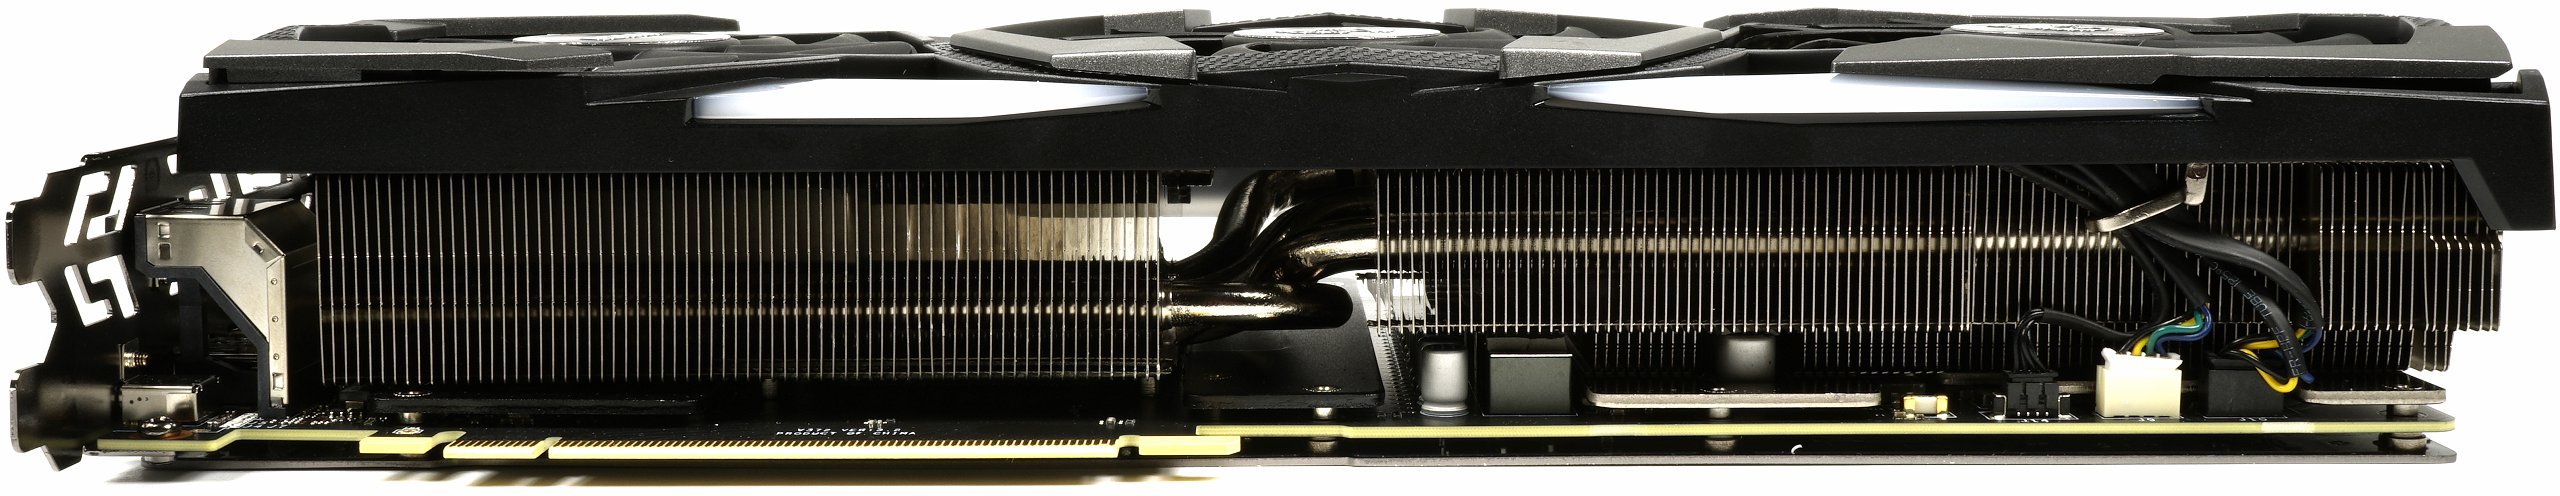 Image 6 : Test : MSI RTX 2080 Gaming X Trio, silencieuse et rapide